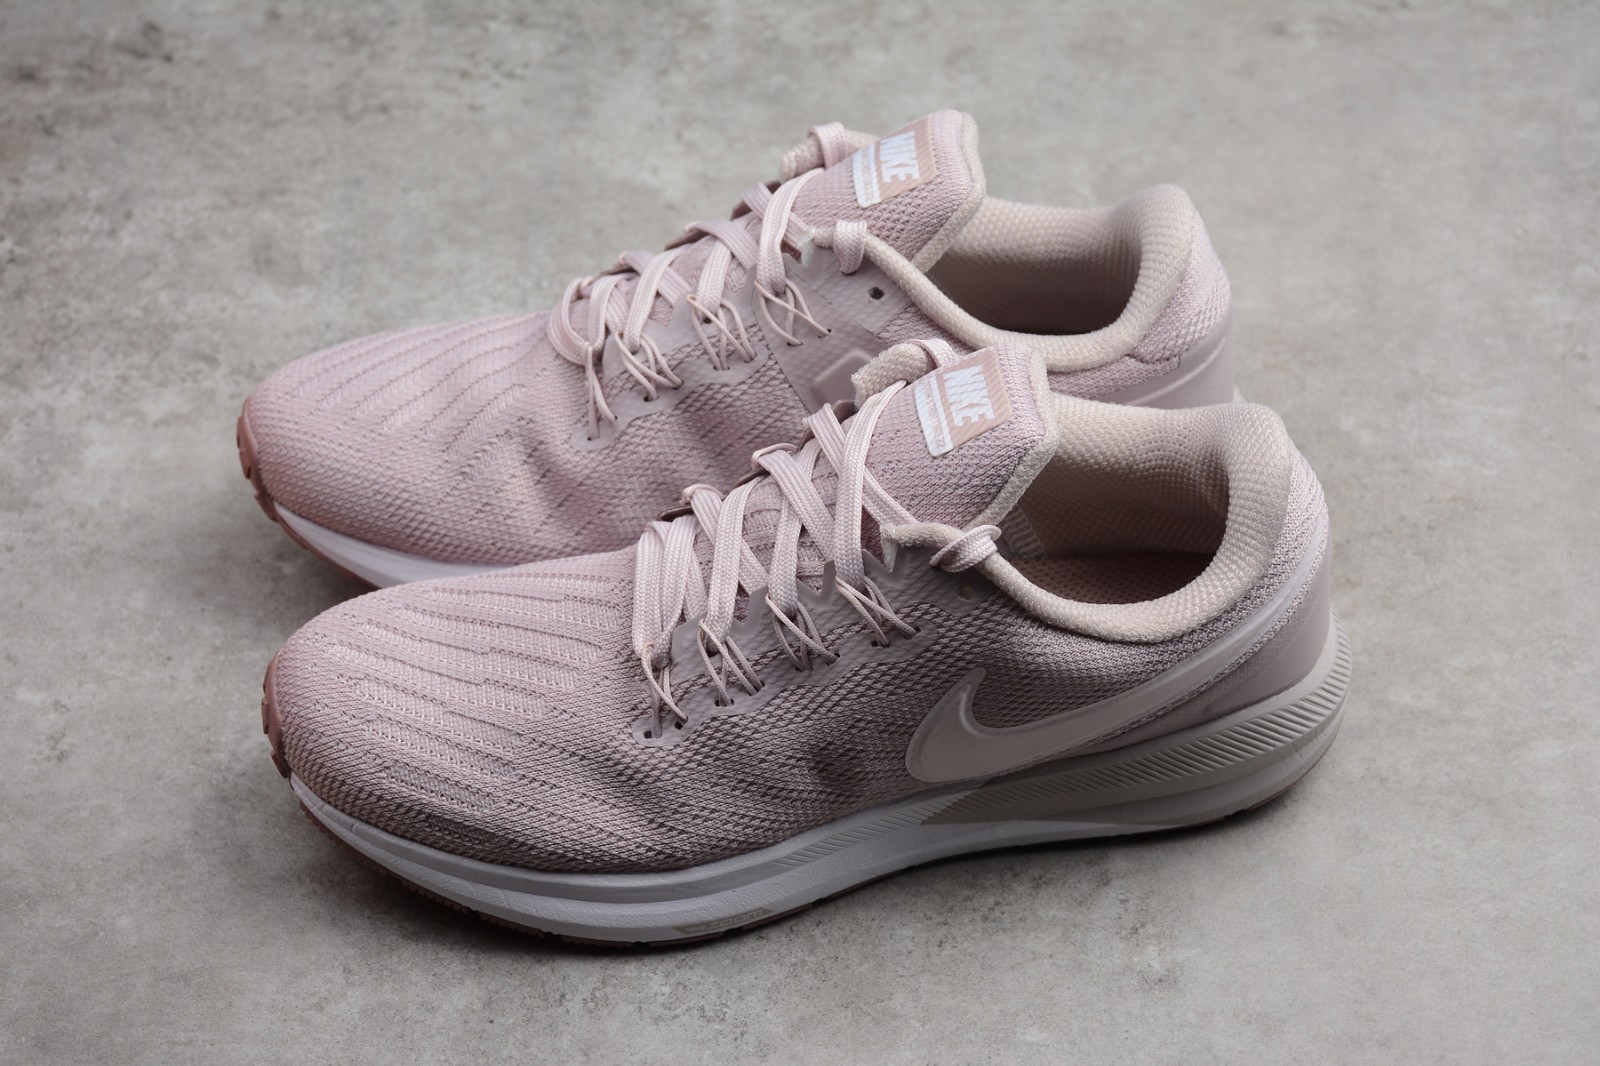 Nike Air Zoom Structure 22 Particle Rose Pale Pink White Womens Running Shoes AA1640 600 - GmarShops - Sneaker Politics x Reebok NPC NCL Storyville